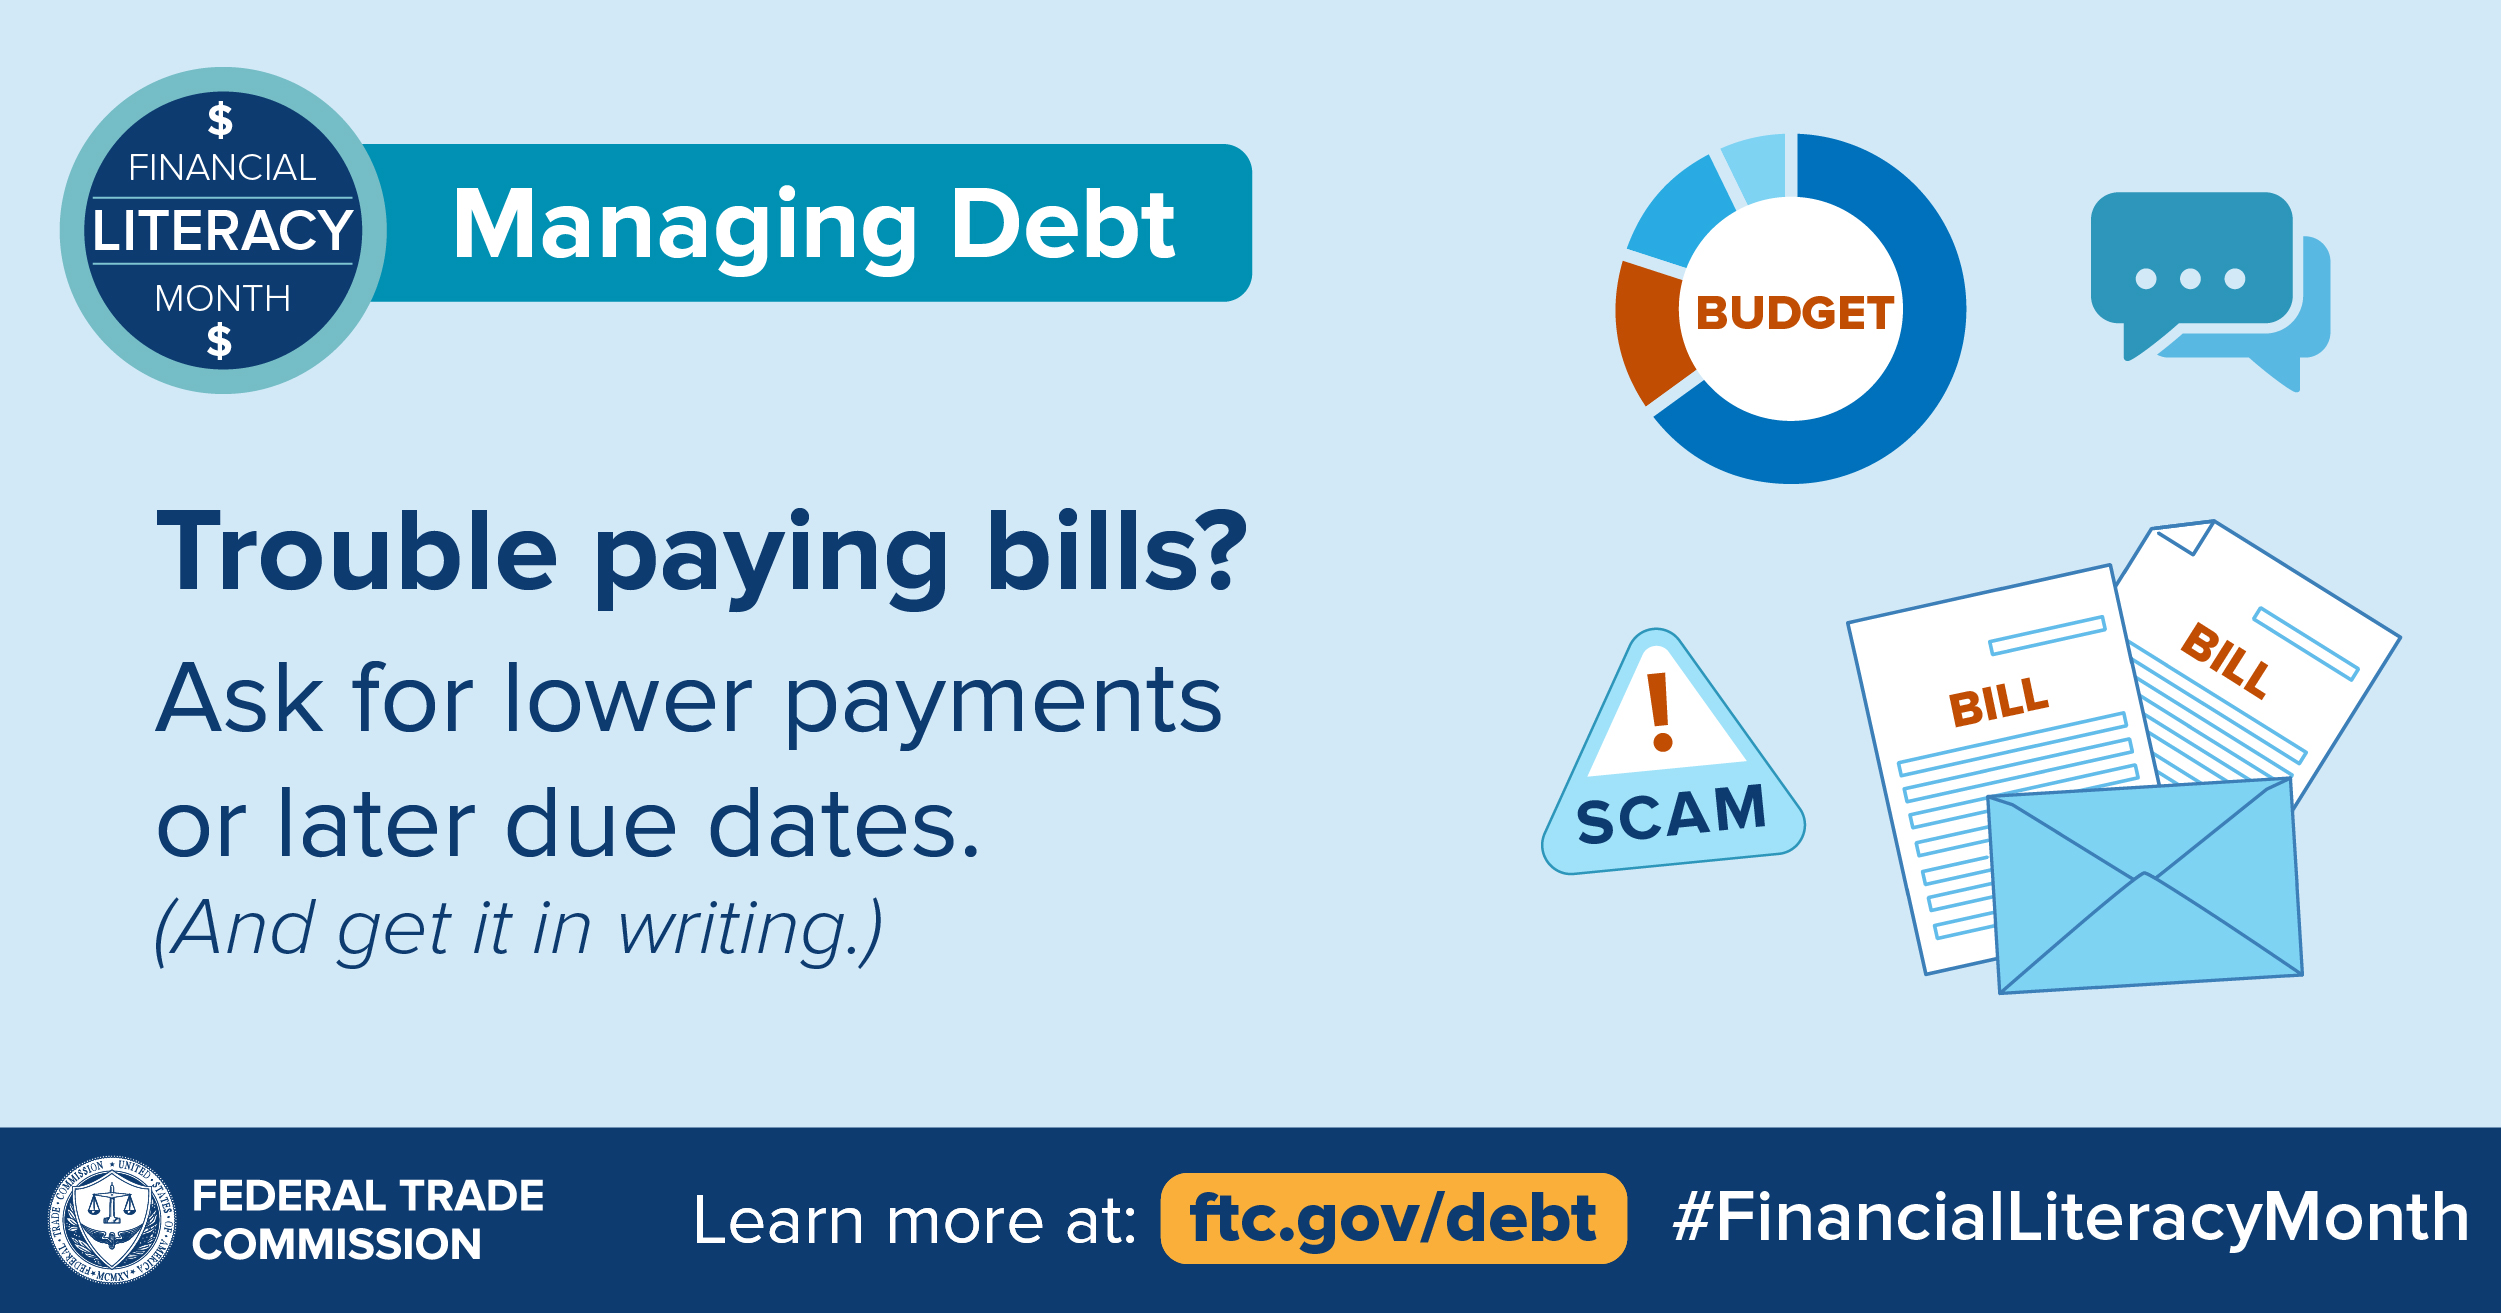 Trouble paying bills? Ask for lower payments or later due dates. (And get it in writing.) Learn more at ftc.gov/debt #FinancialLiteracyMonth